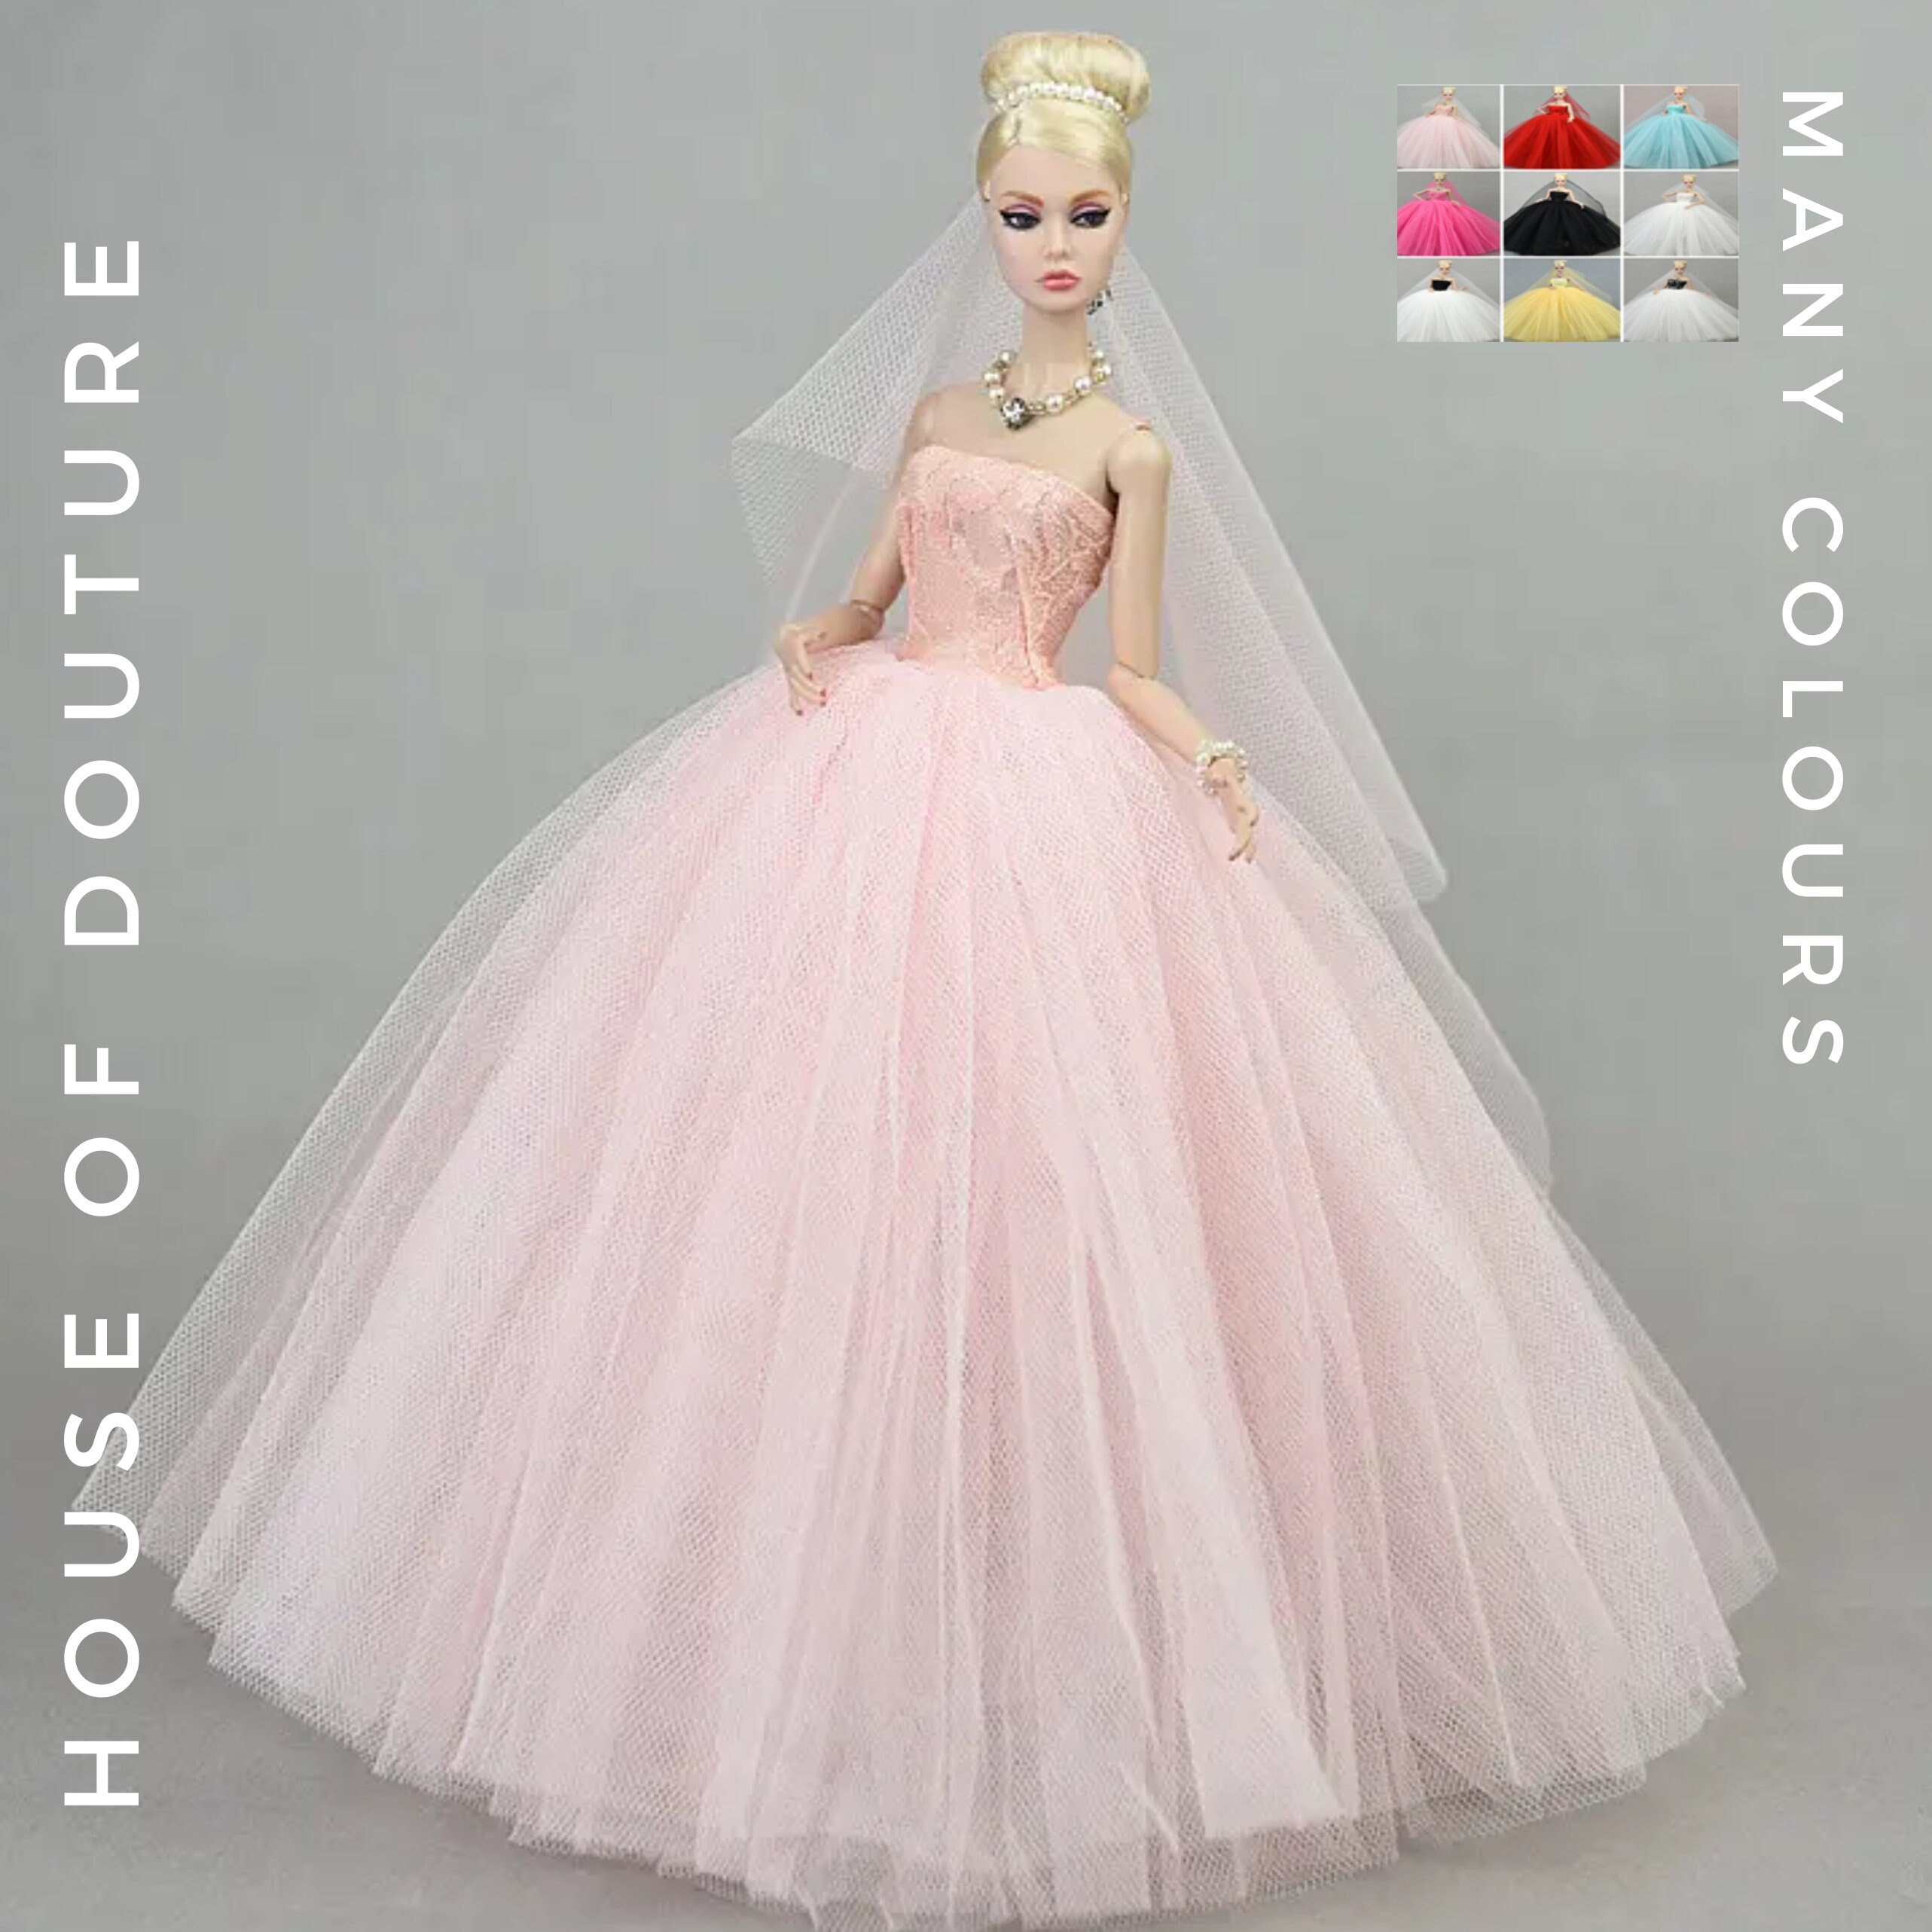 Fashionable and Adorable Barbie-inspired Dresses for Women ... | Womens  dresses, Inspired dress, Gowns